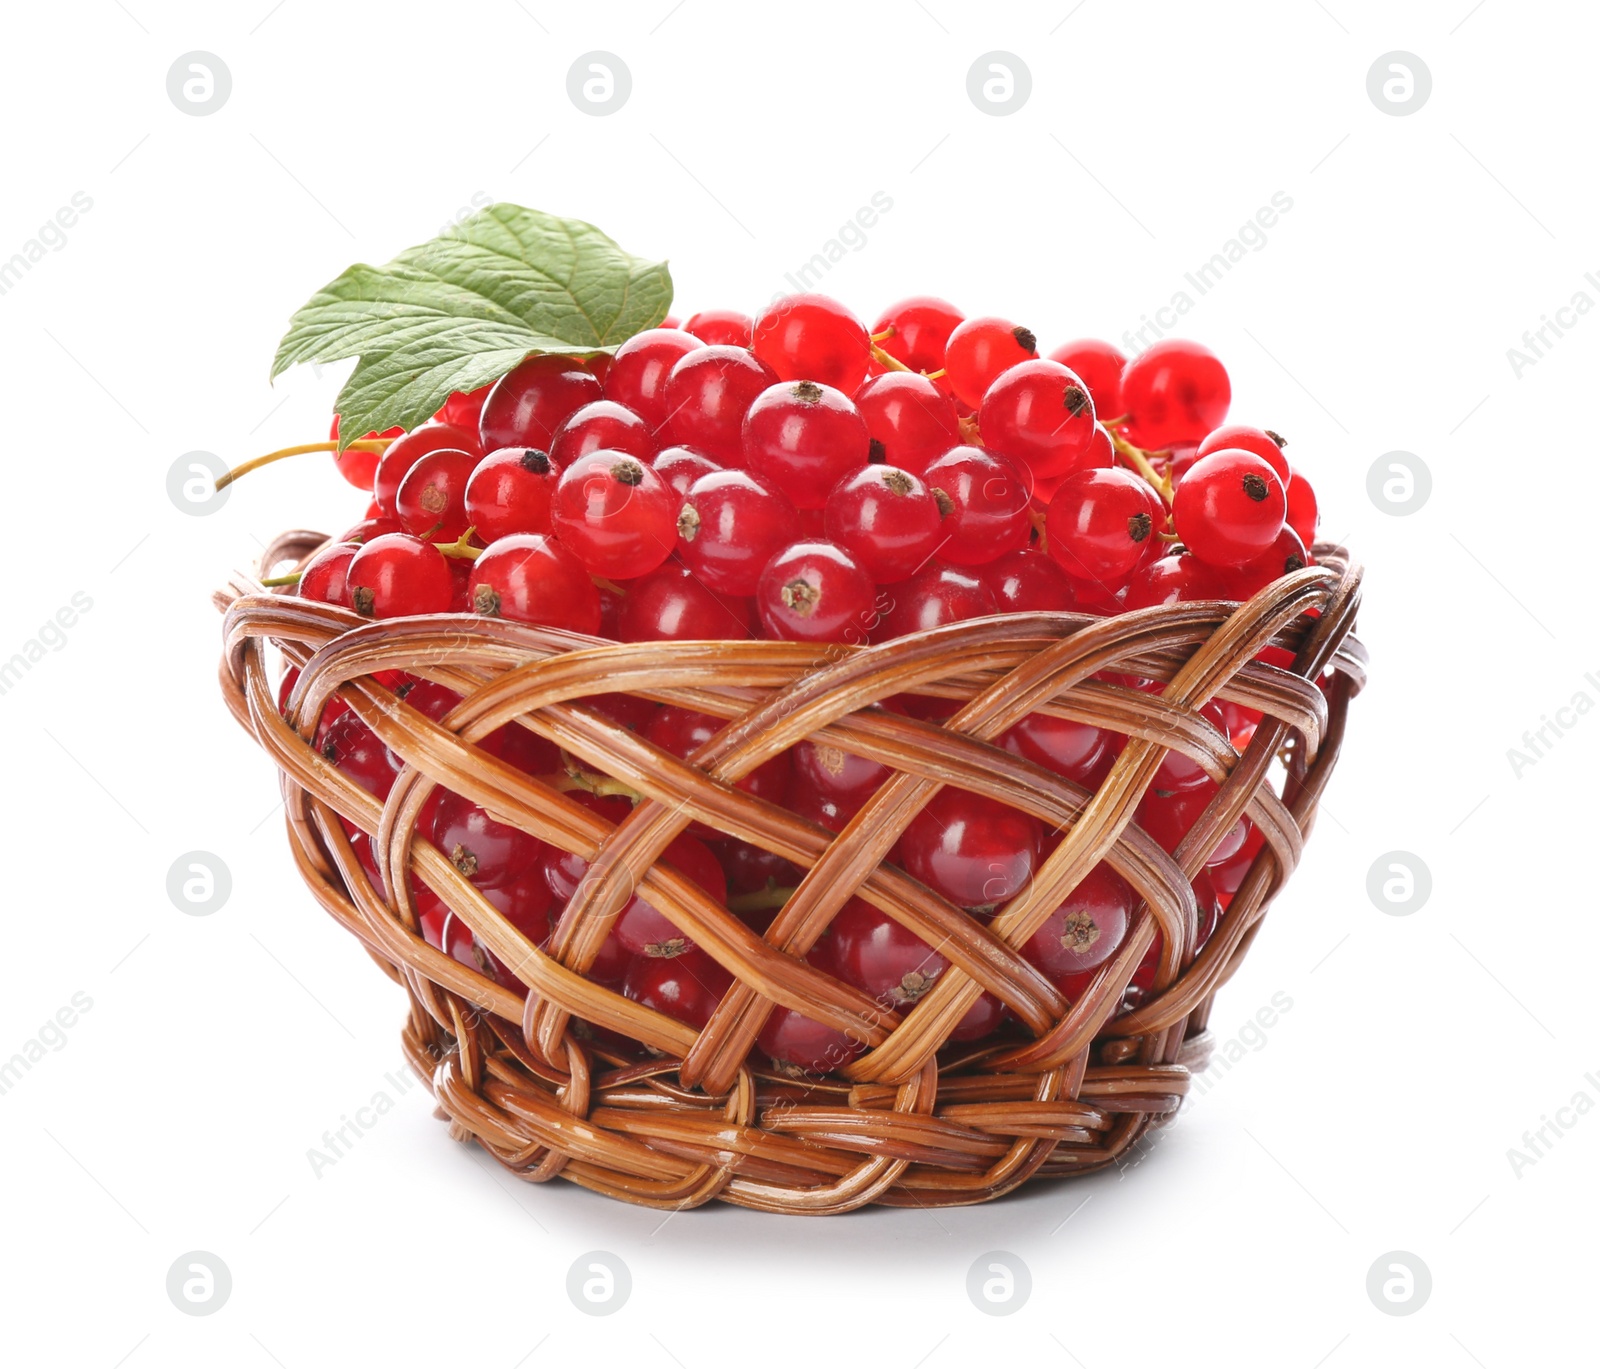 Photo of Delicious ripe red currants in bowl isolated on white